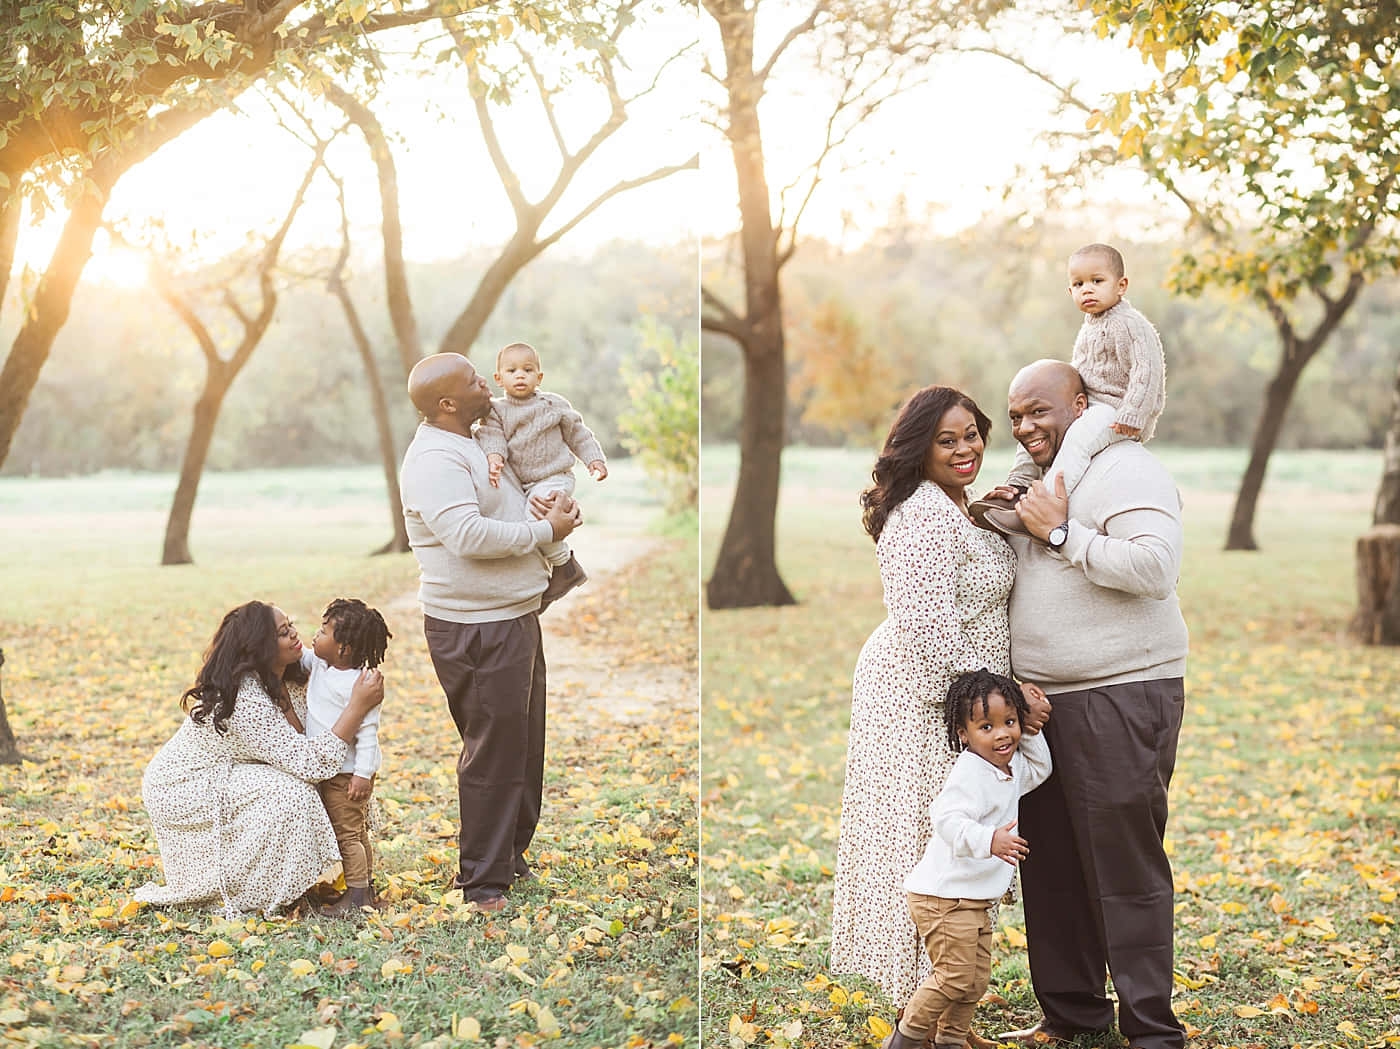 A happy Fall family embracing in a warm Autumn setting